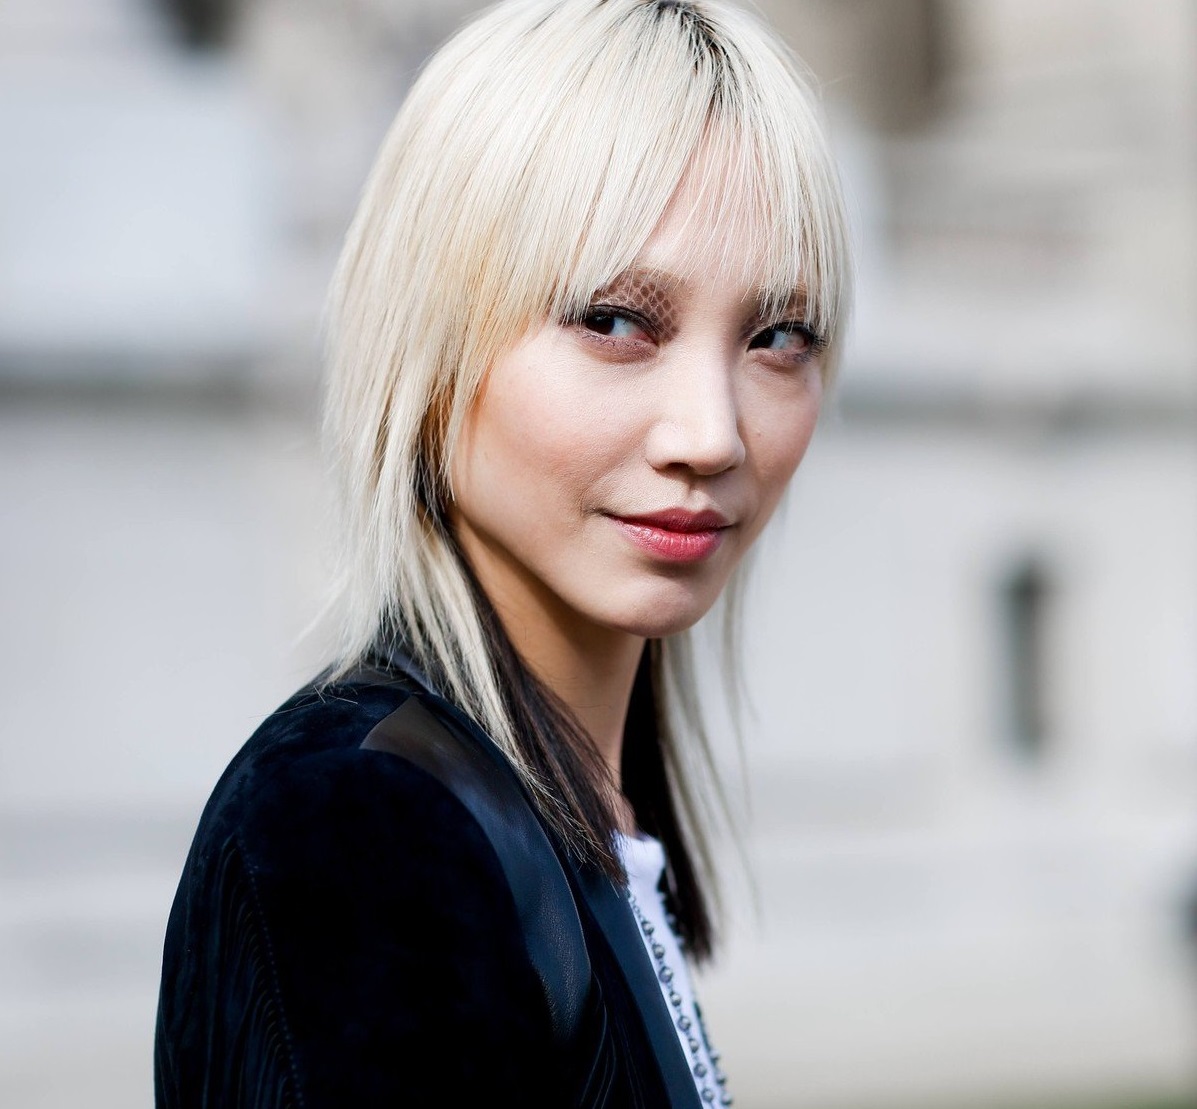 Street style, model Soo Joo after Chanel Fall-Winter 2016-2017 show held at Grand Palais, in Paris, France, on March 8, 2016., Image: 277225110, License: Rights-managed, Restrictions: , Model Release: no, Credit line: Profimedia, Abaca